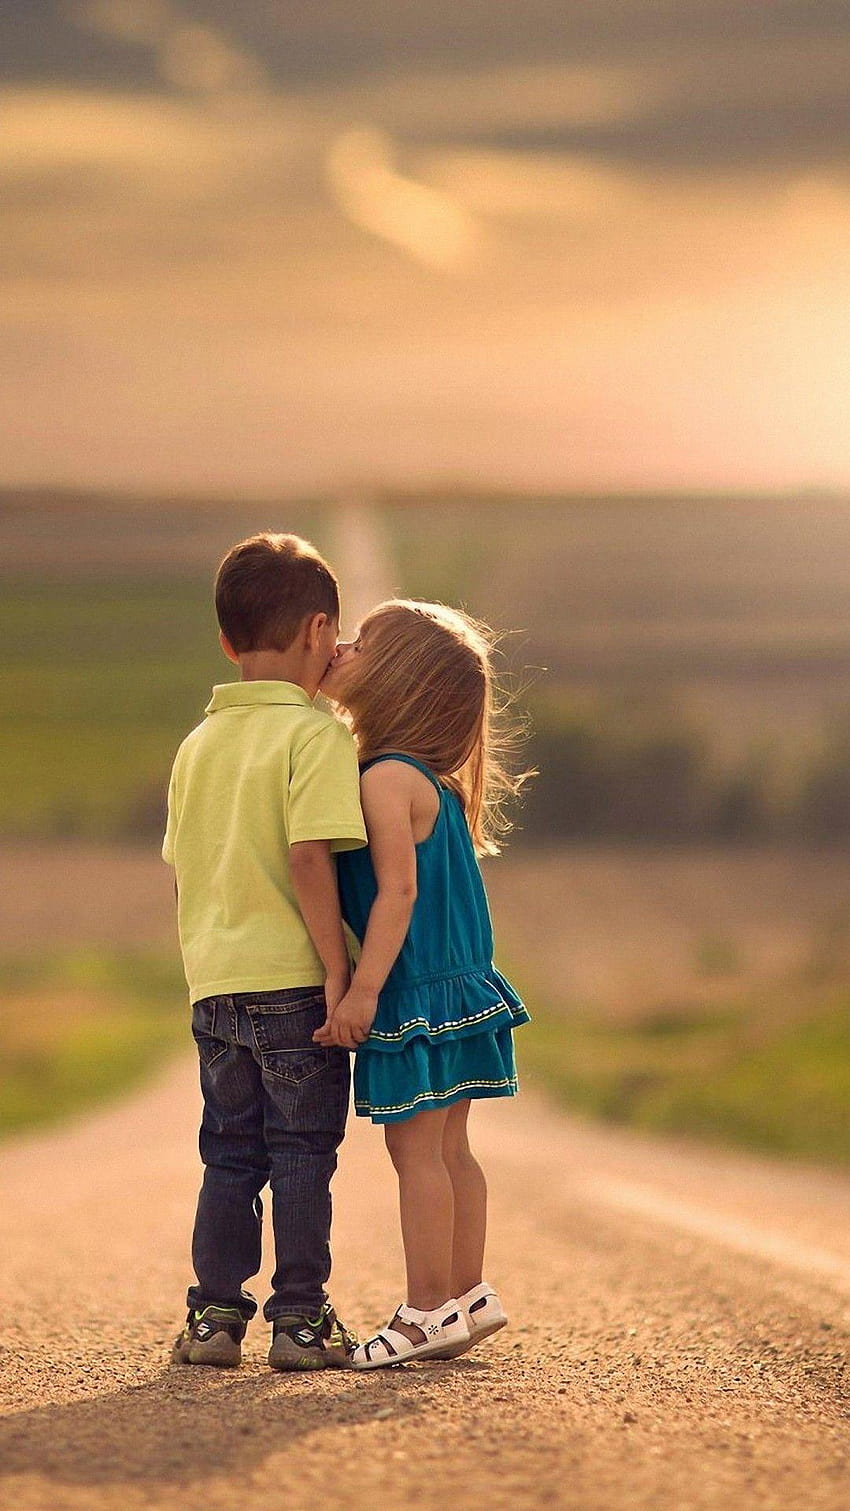 Baby Love Couple Cute Kids For Xiaomi wallpaper ponsel HD